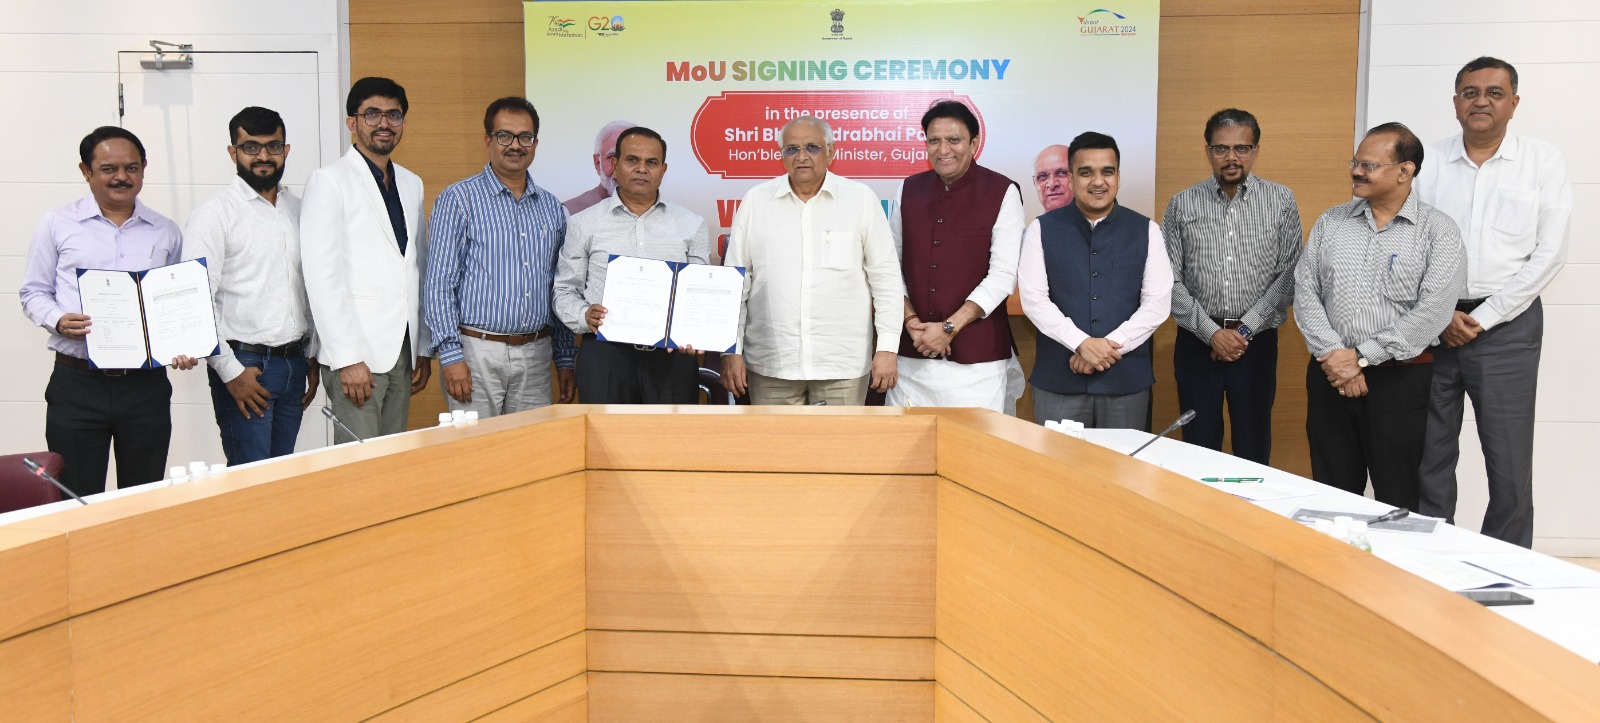 Gujarat: In the fifth phase, in a single day, four MoUs have been signed with an investment worth Rs 1,000 crore